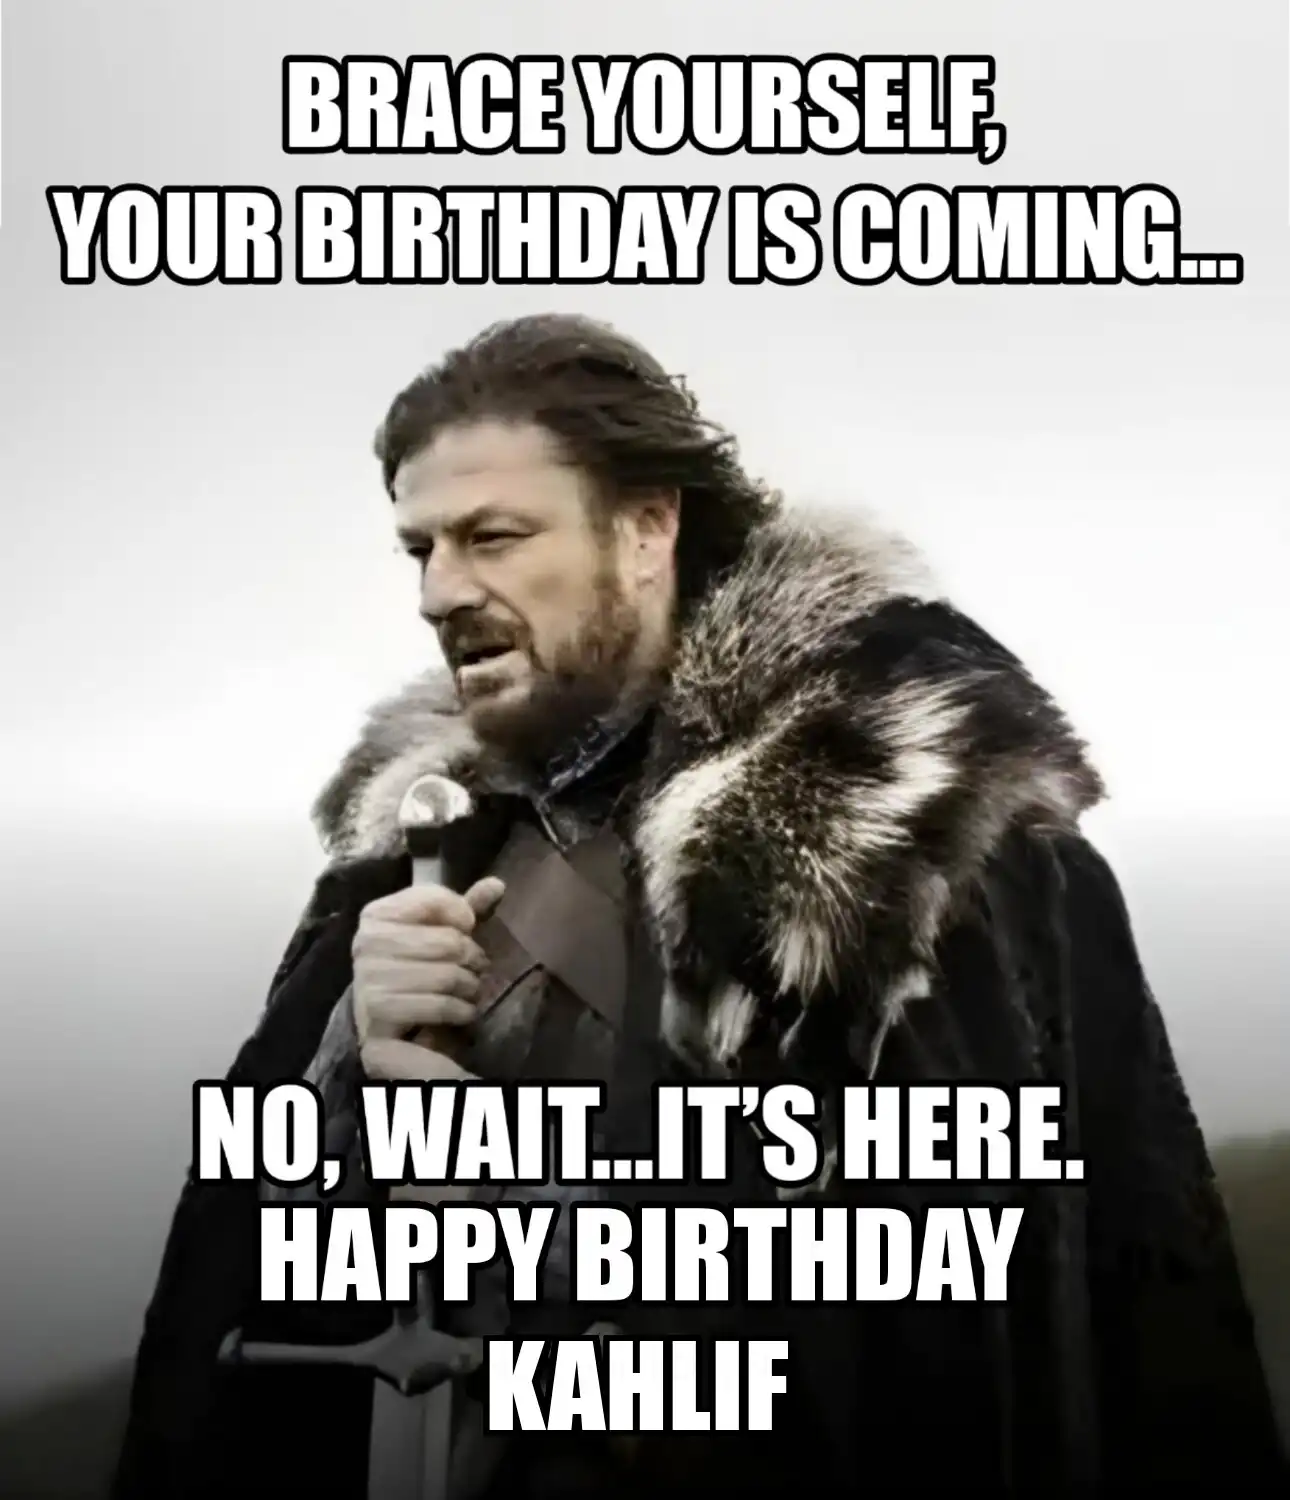 Happy Birthday Kahlif Brace Yourself Your Birthday Is Coming Meme